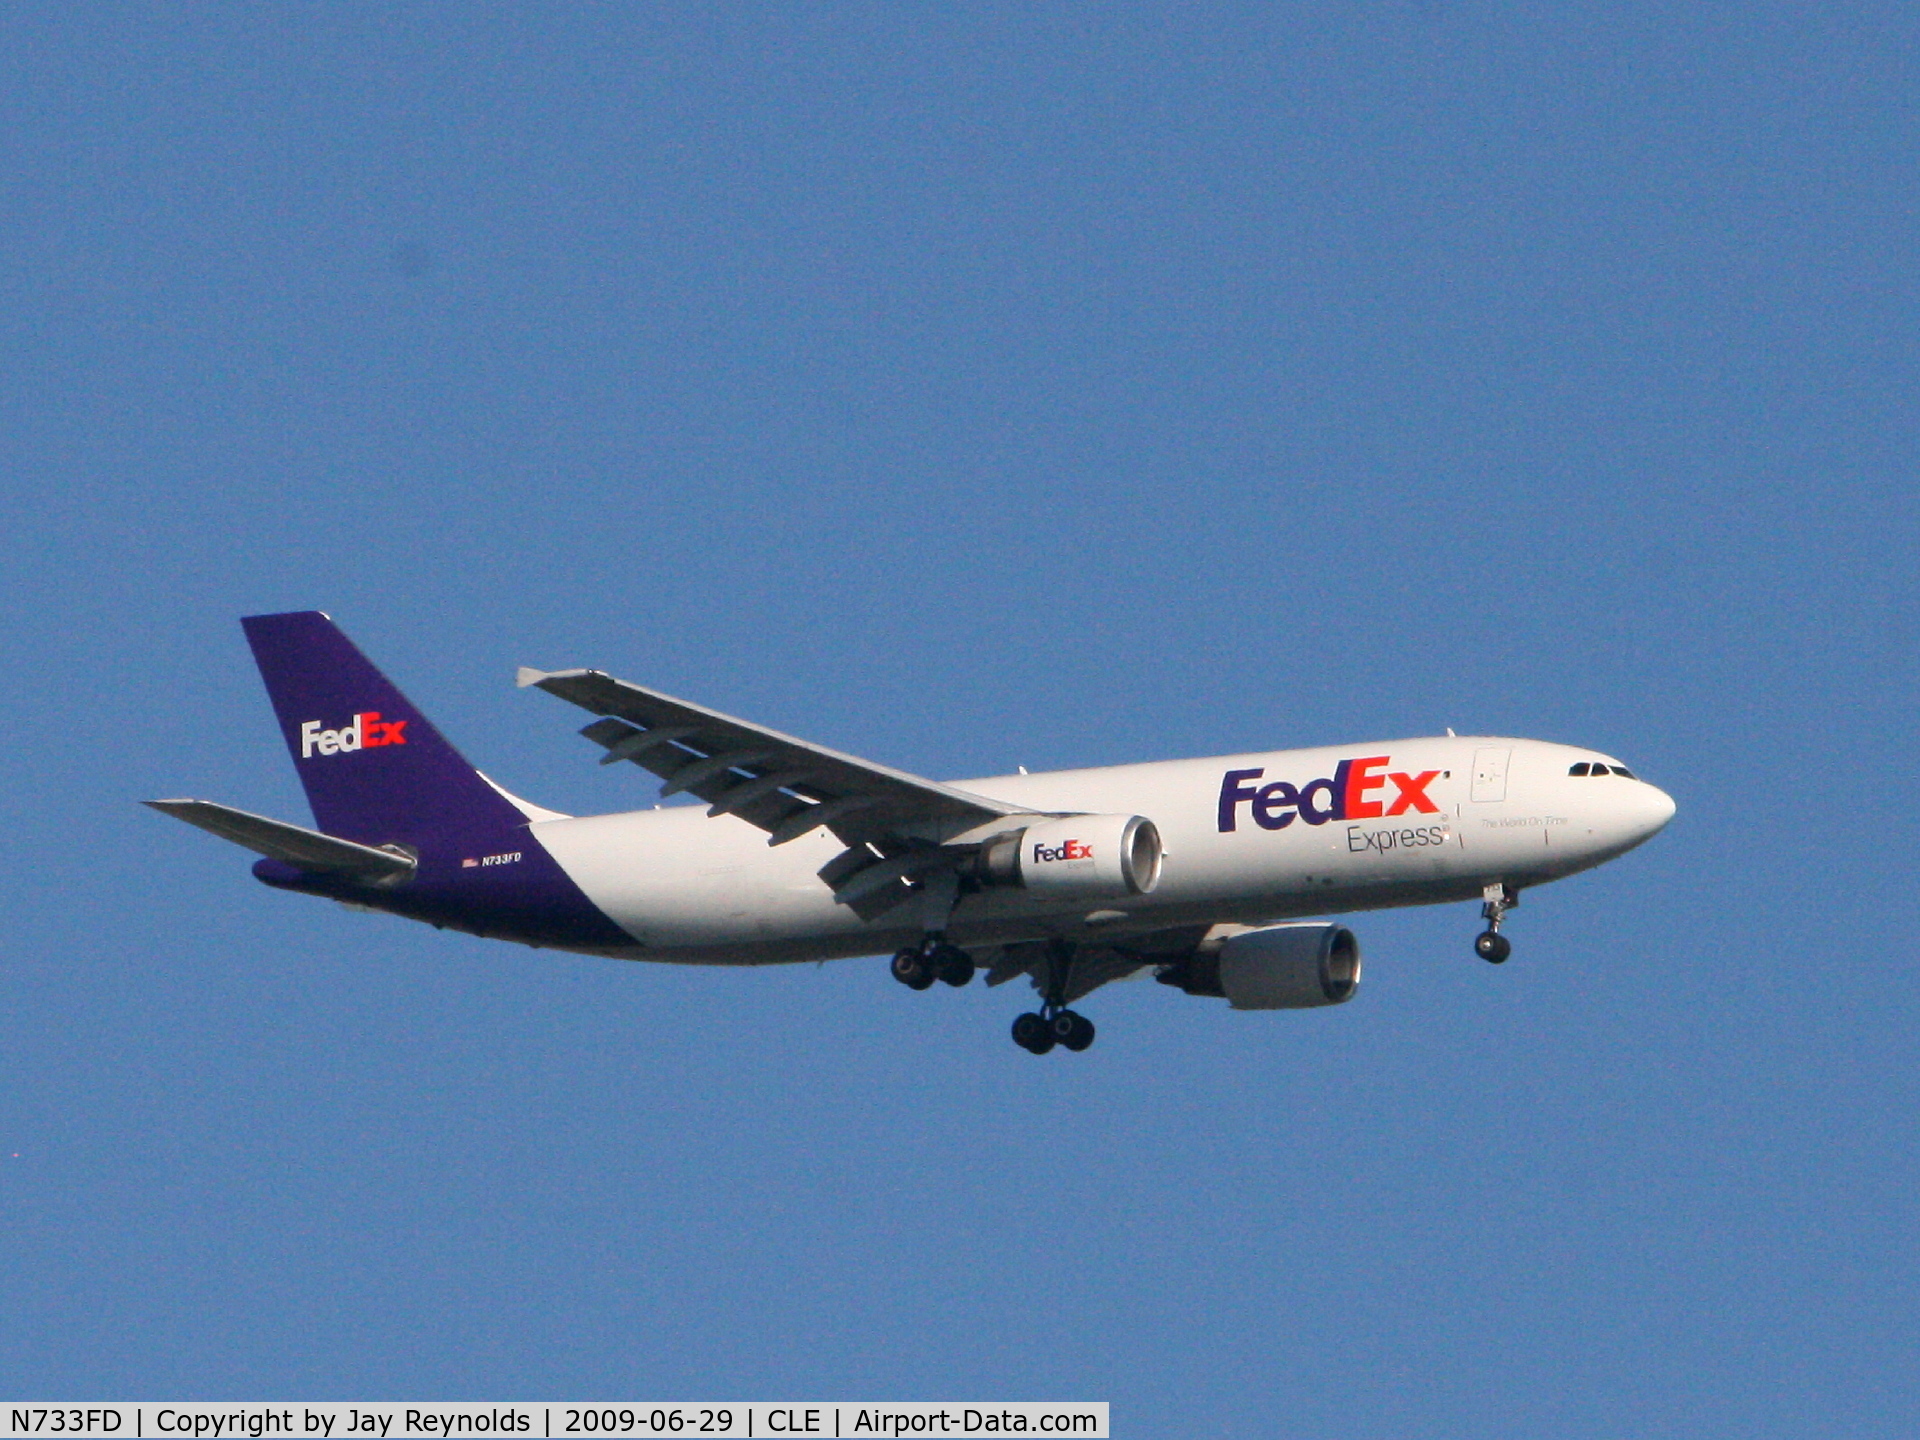 N733FD, 1993 Airbus A300B4-605R C/N 715, Fed EX AirBus Sunday Run into CLE